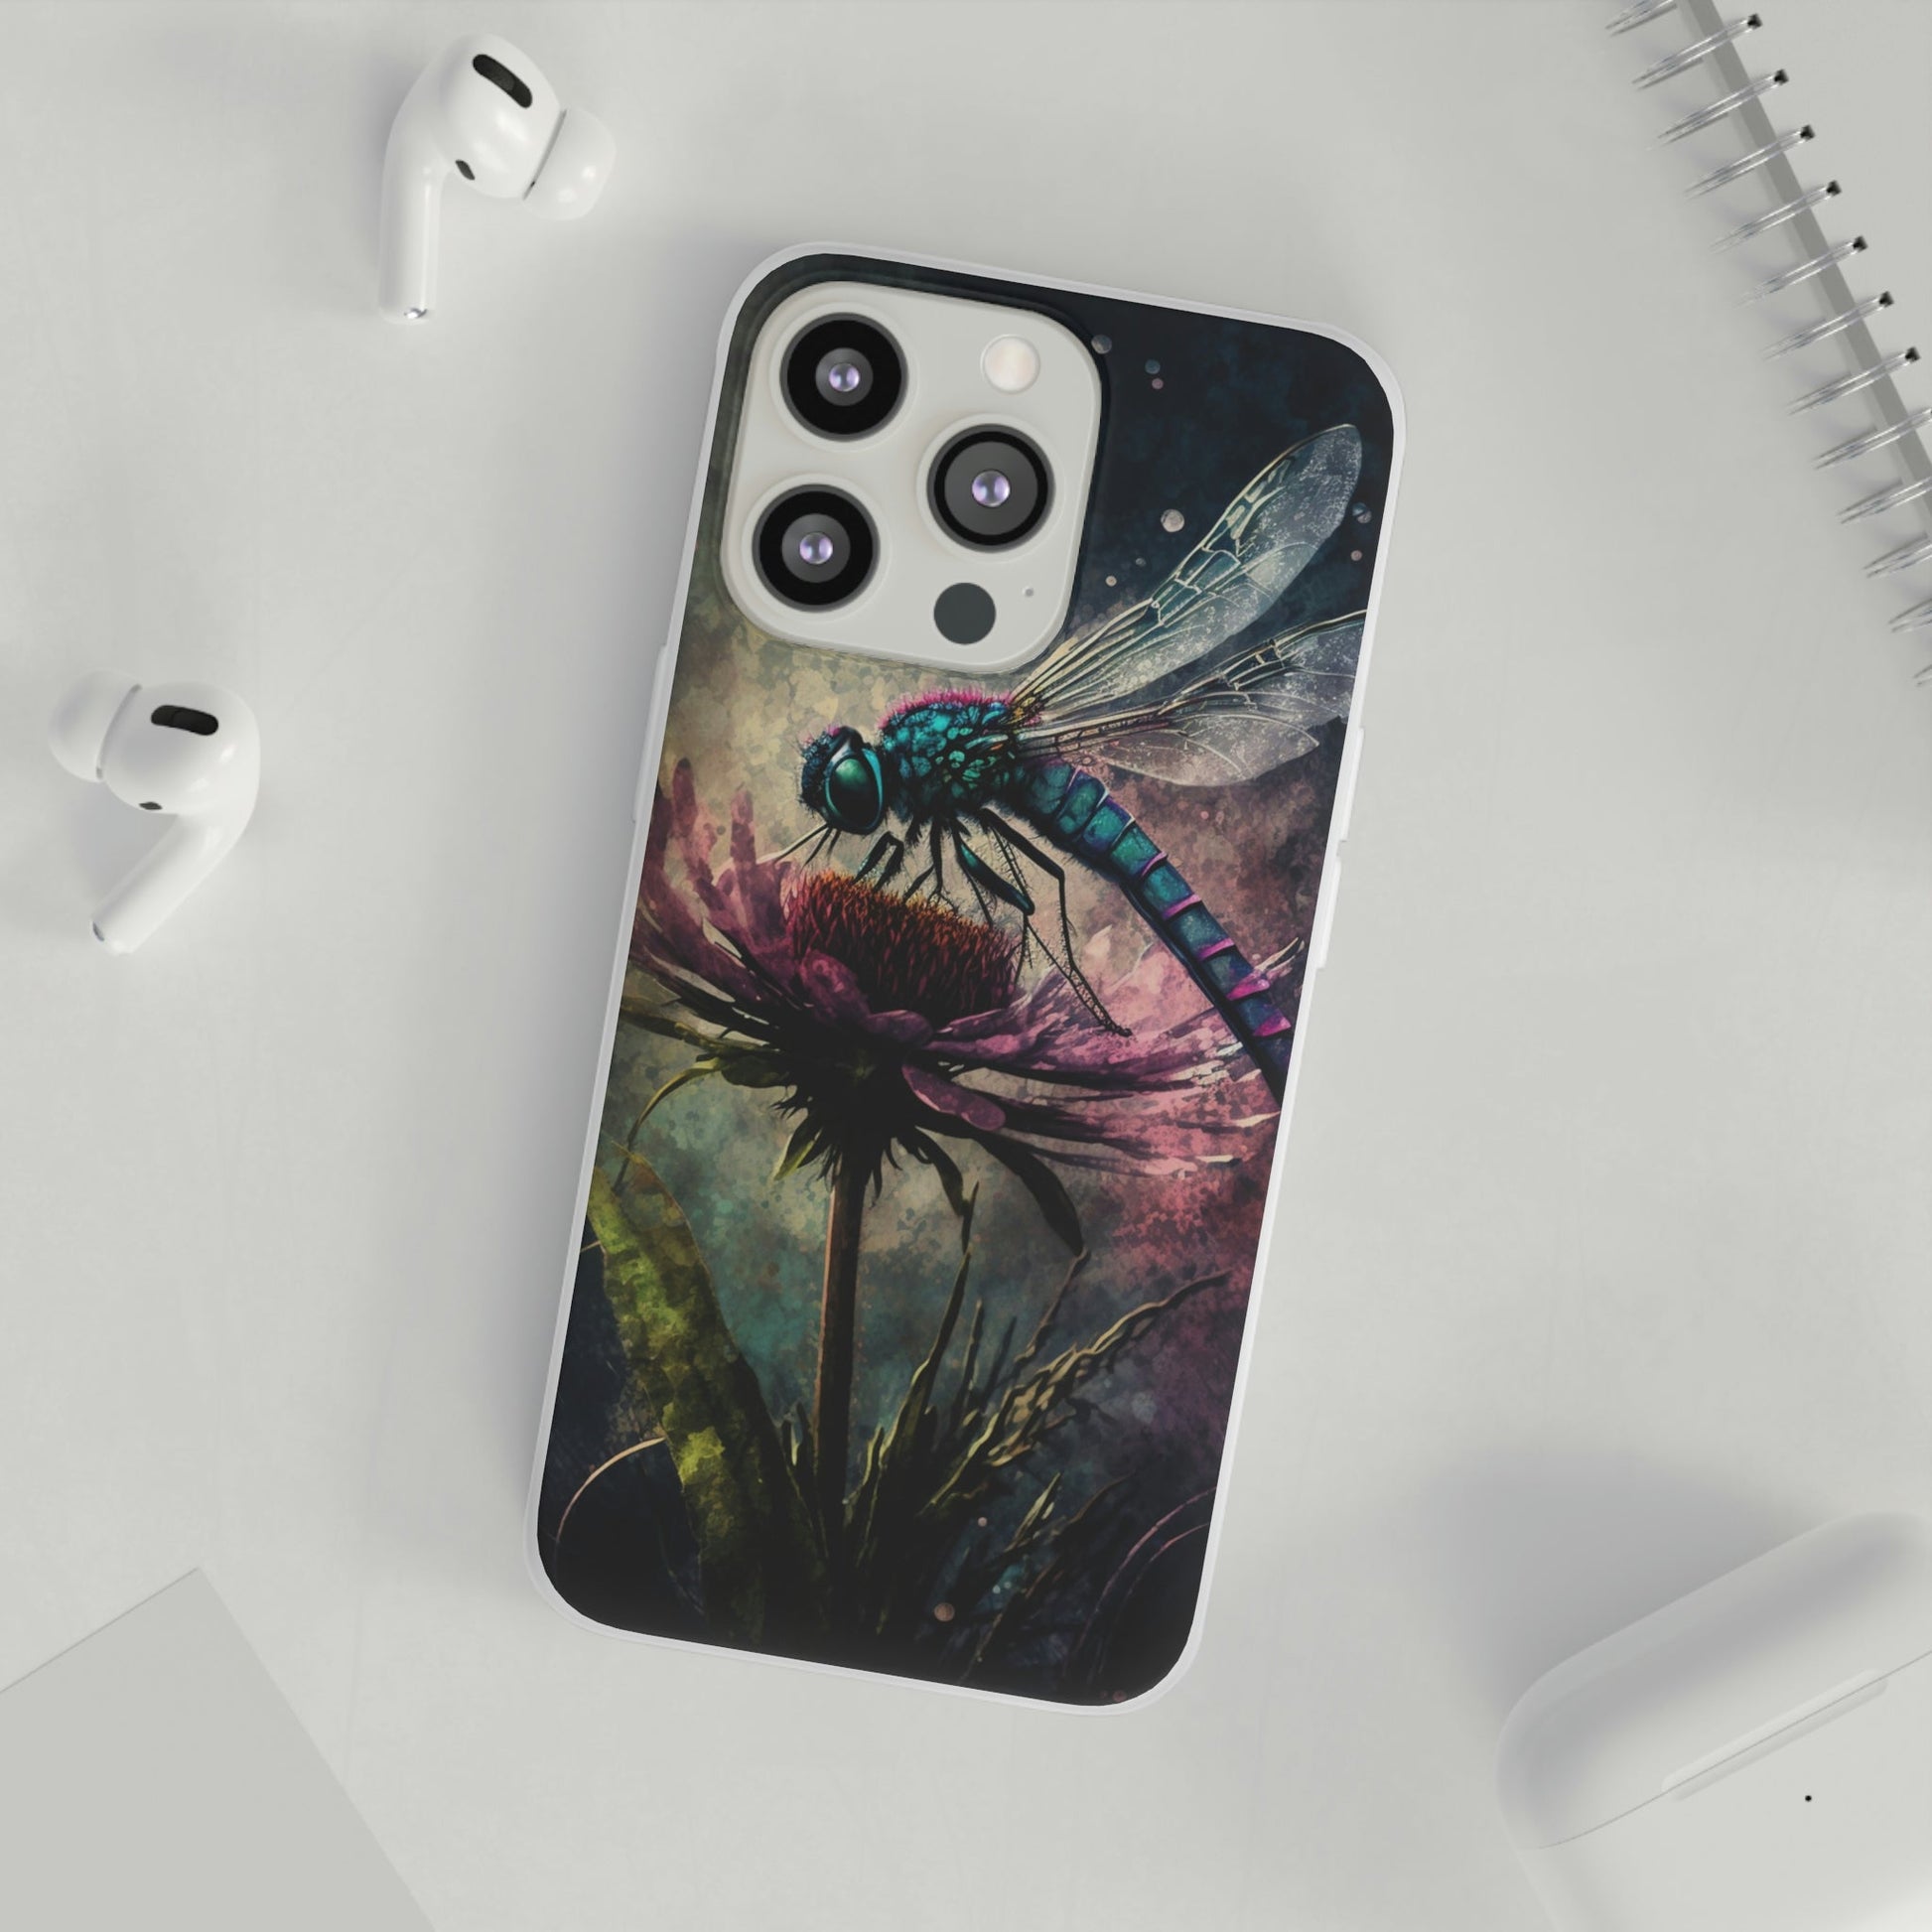 Grunge Dragonfly Phone Cases